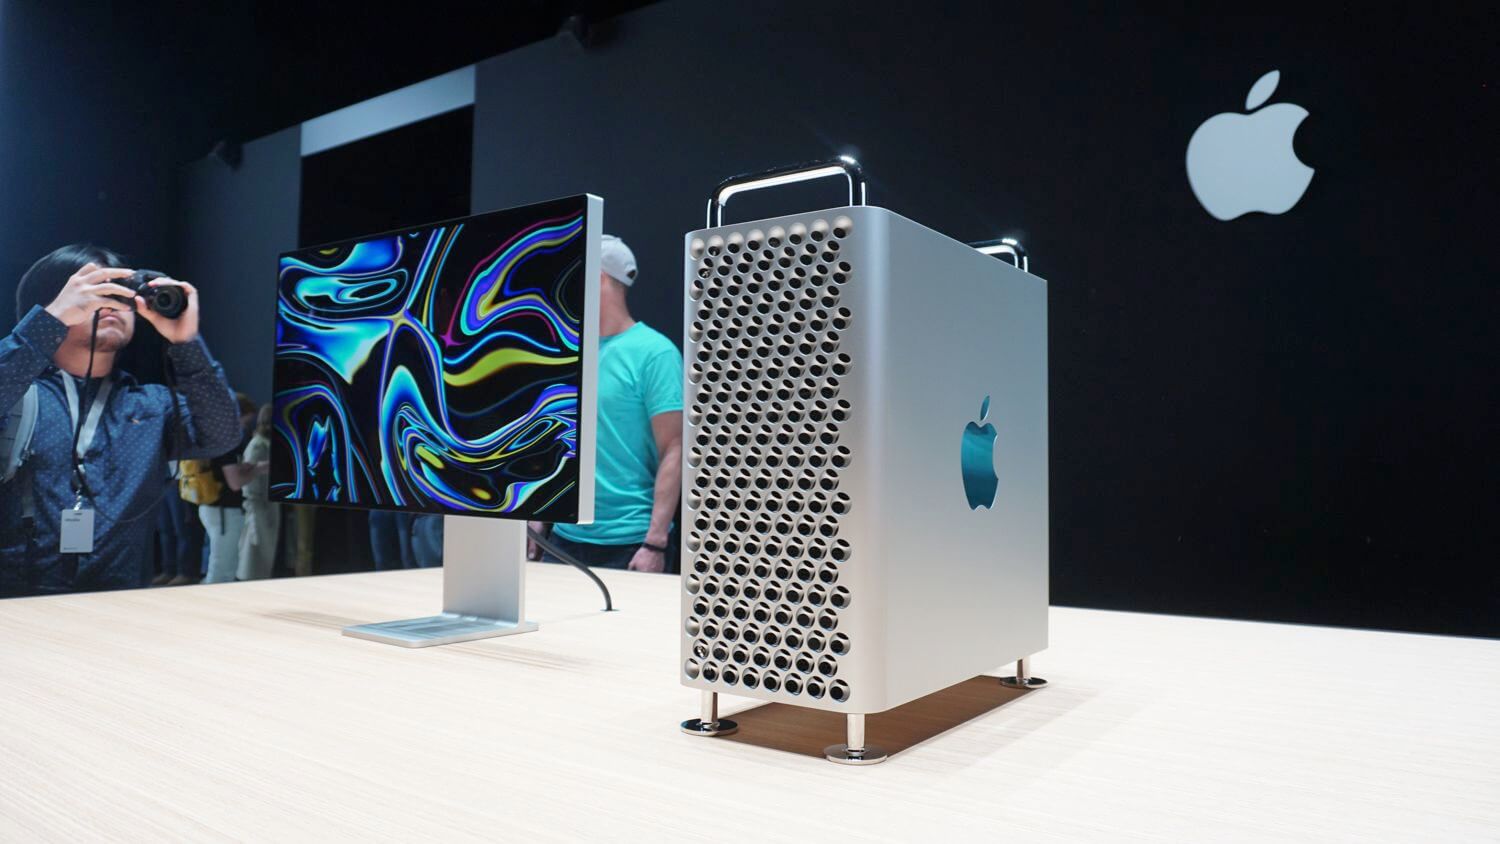 Mac Pro remains the only device with an Intel processor in the Apple Mac lineup